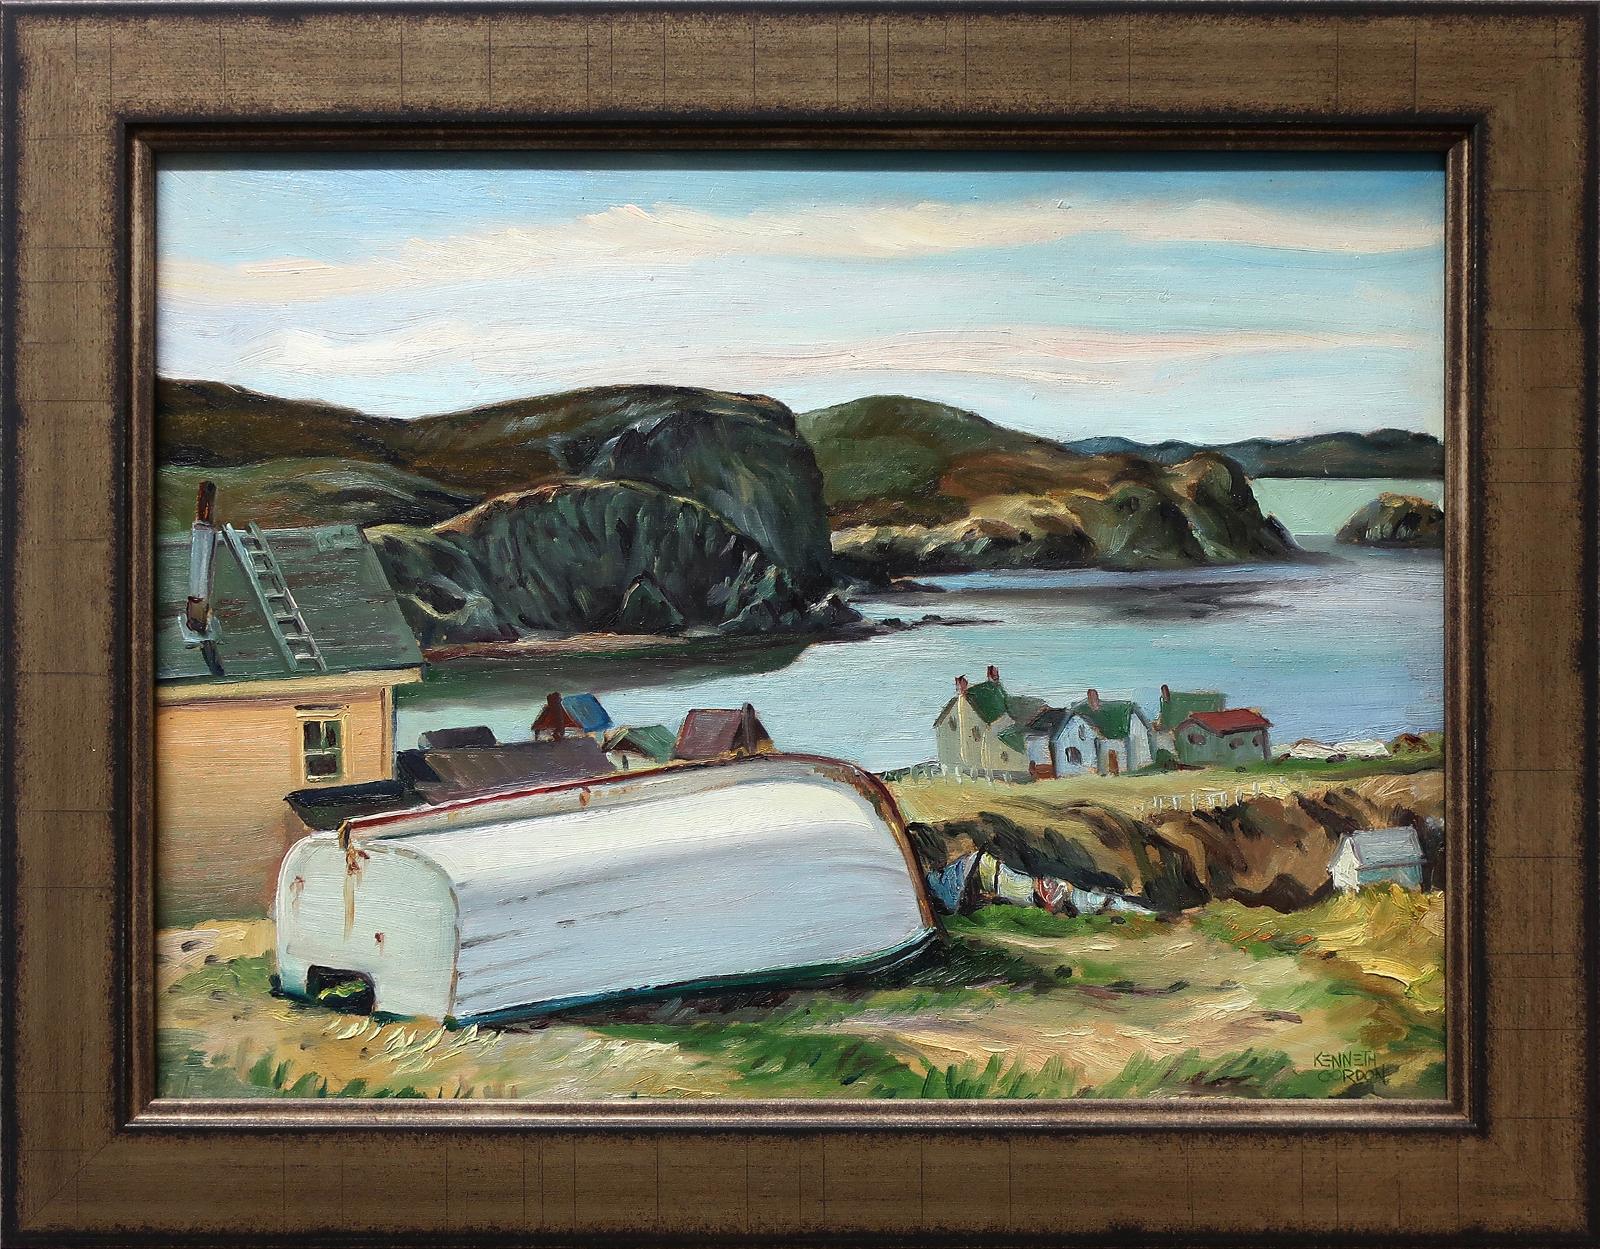 Kenneth Gordon (1929-1998) - Early June At Cows Head, Nfld